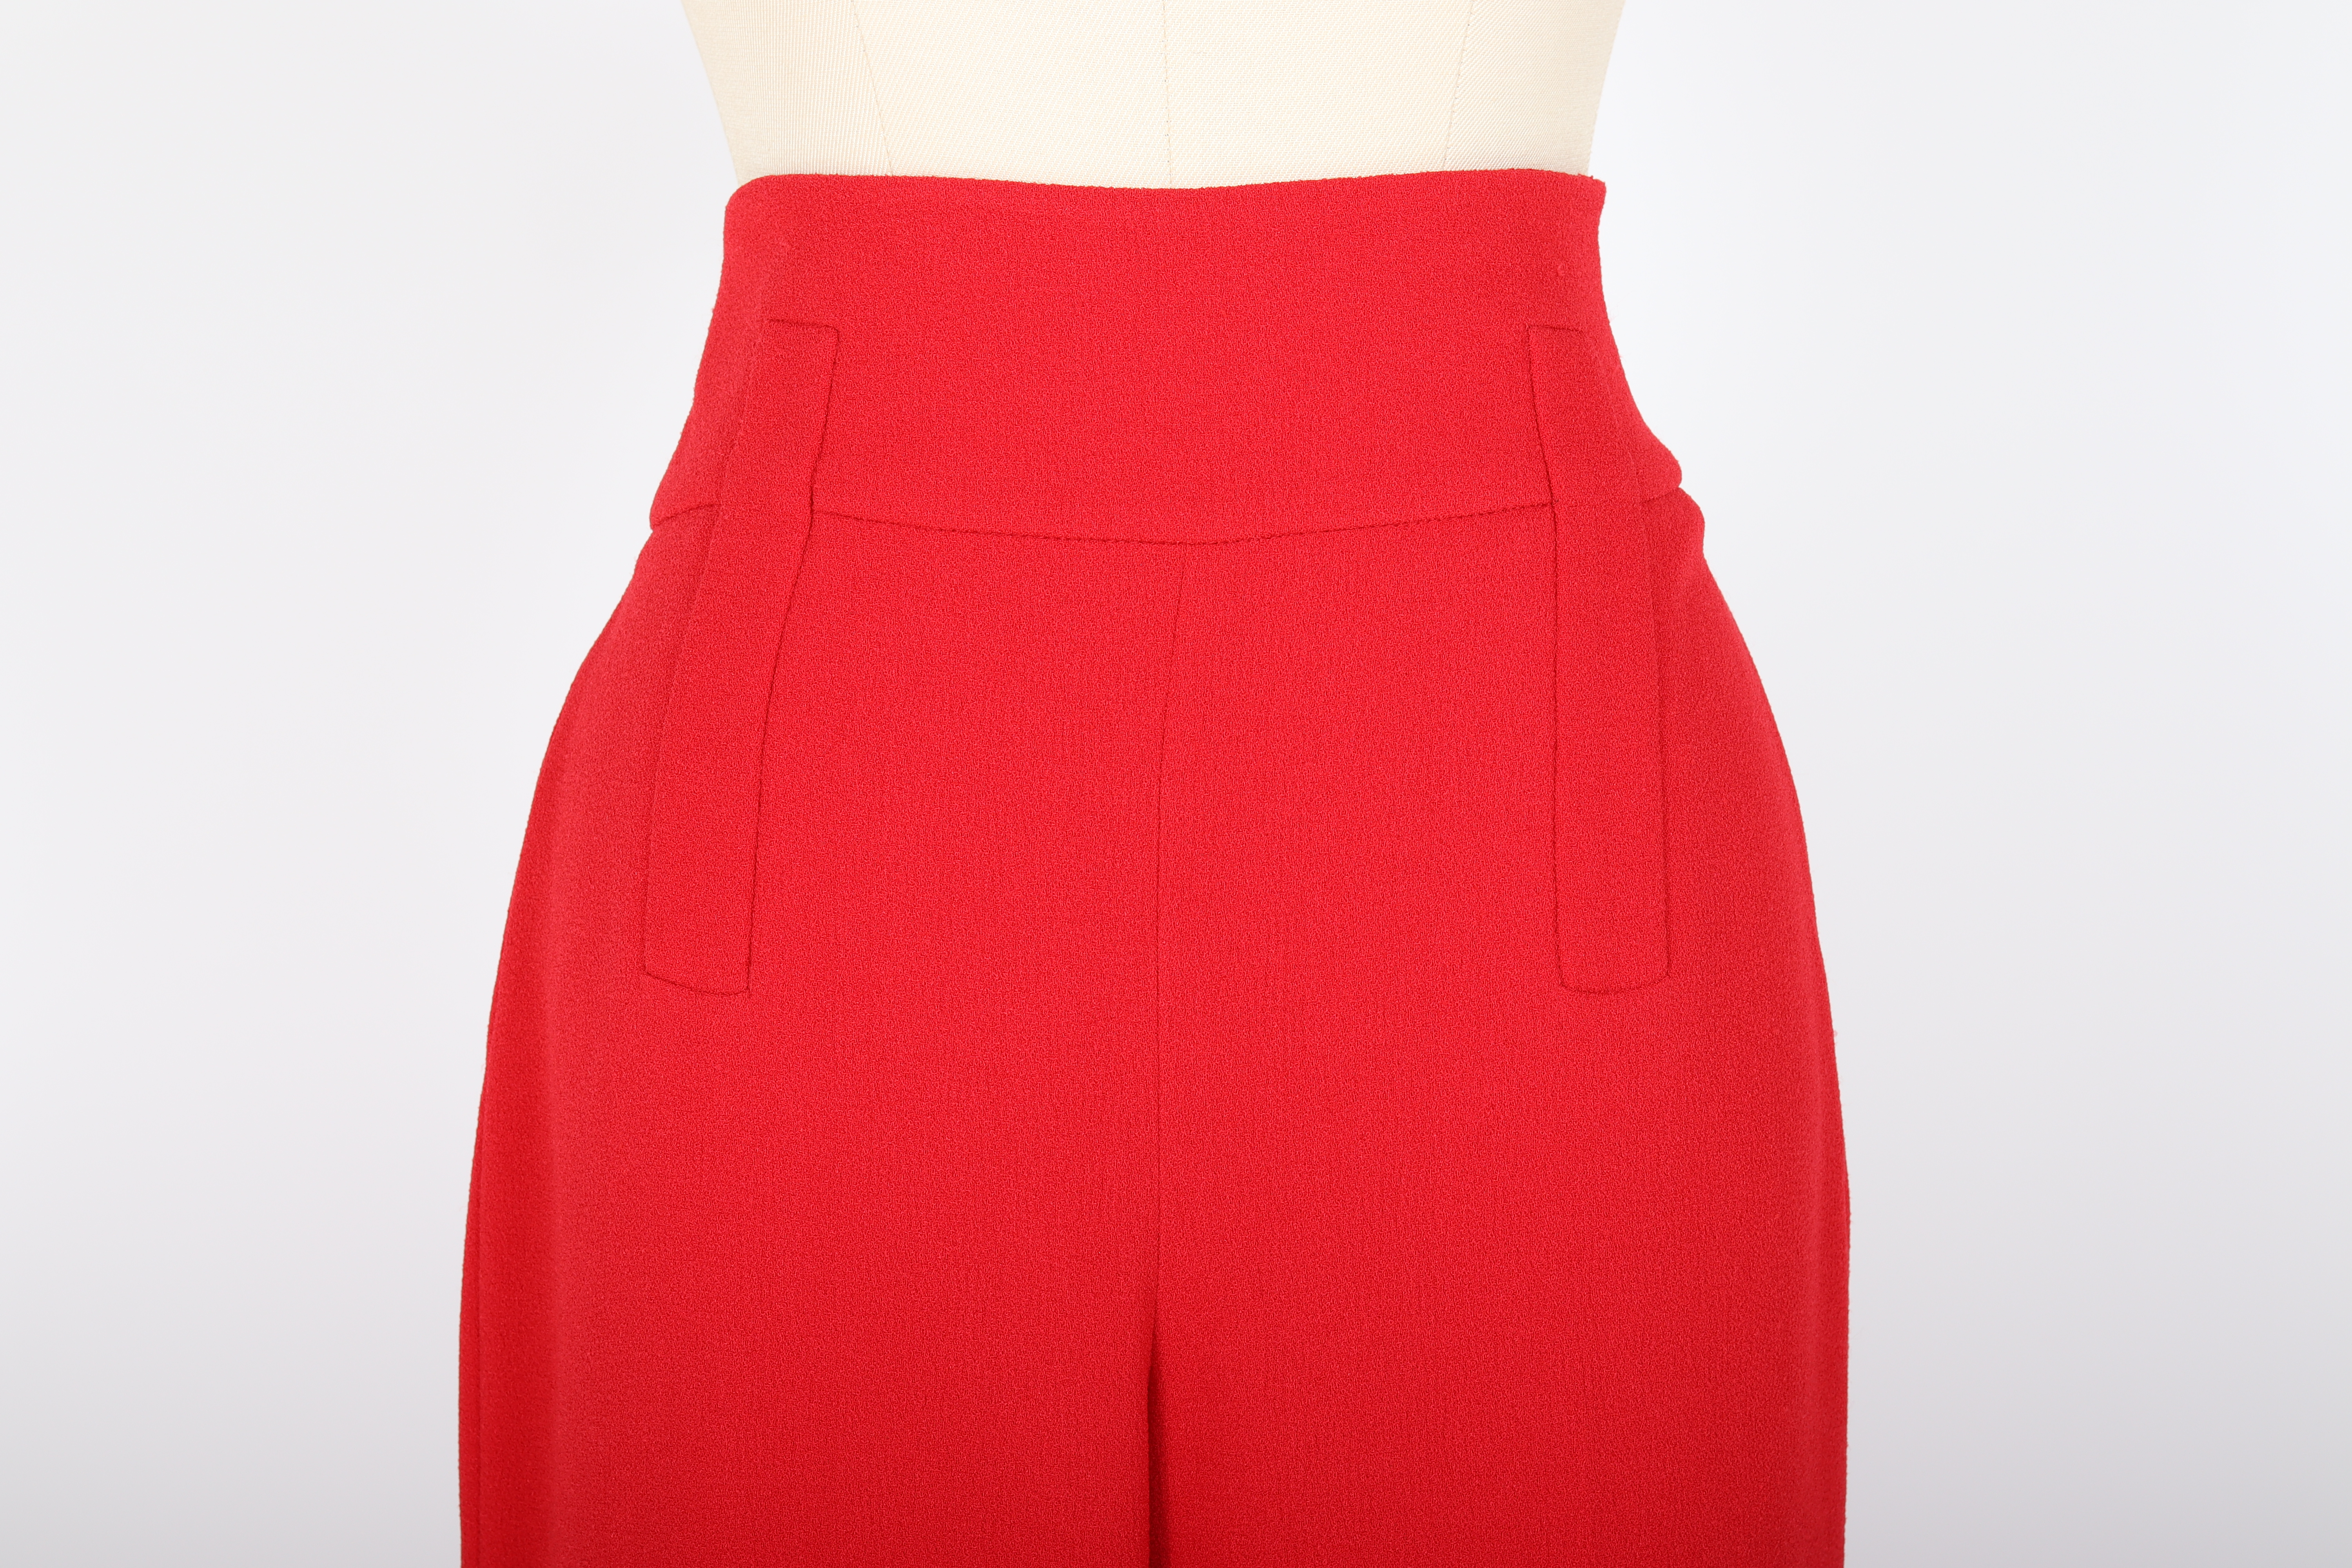 KAREN MILLEN - A PAIR OF WIDE LEGGED RED TROUSERS - Image 2 of 2